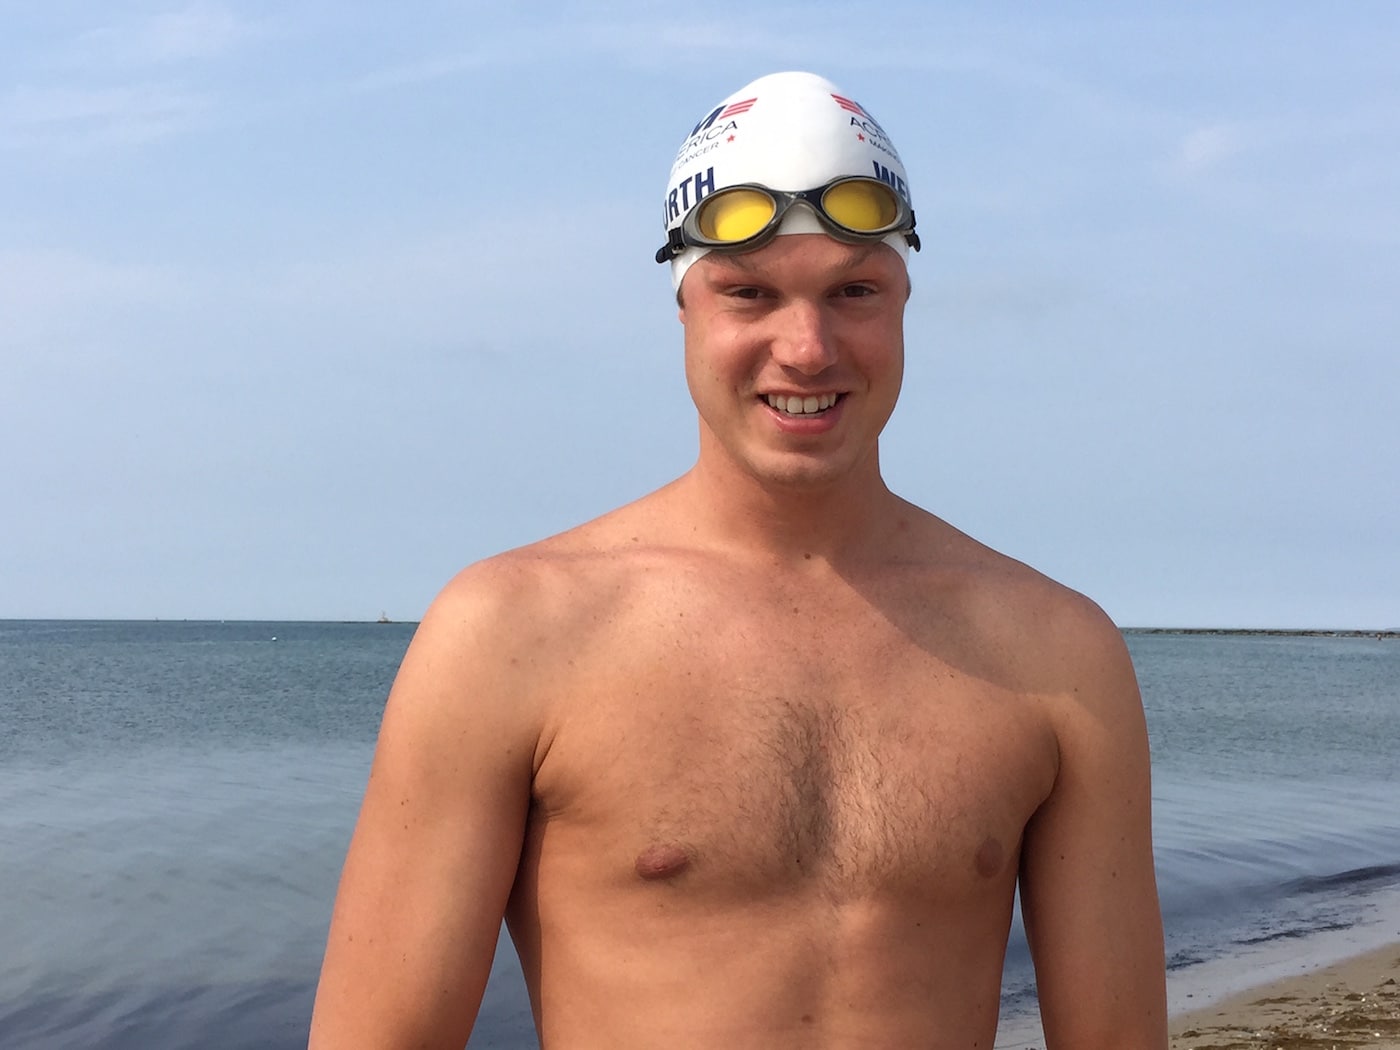 $25,000 Challenge Grant Will Support Grant Wentworth’s Cape Cod to Nantucket Solo Swim Benefitting Island Cancer Care